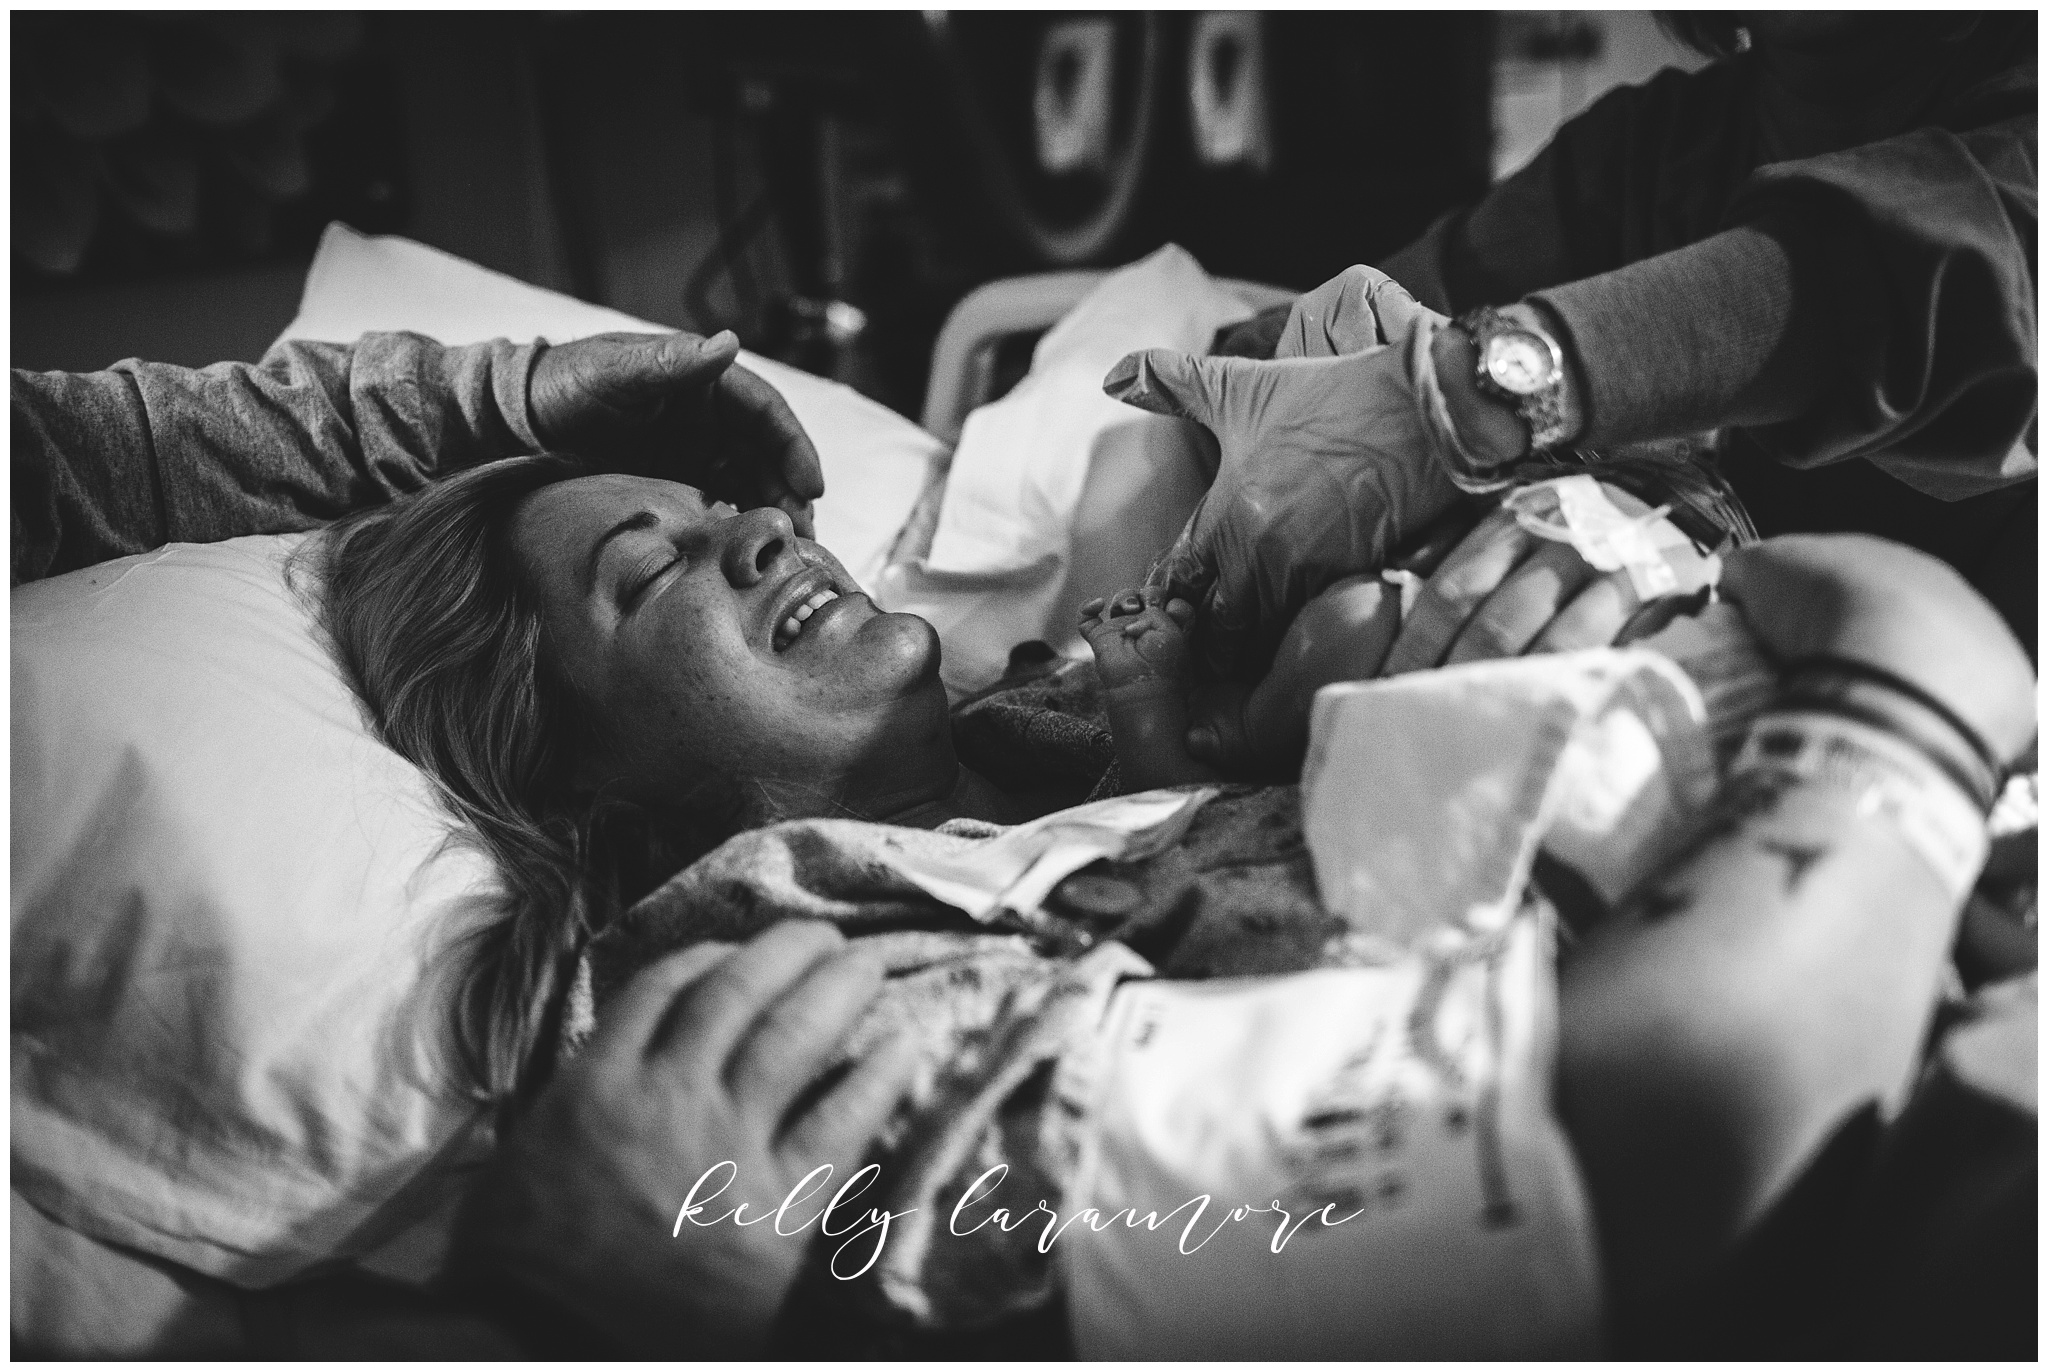 st louis birth story photographer, st louis family photographer, missouri baptist birth center birth, delivery room, mom holding baby girl for the first time